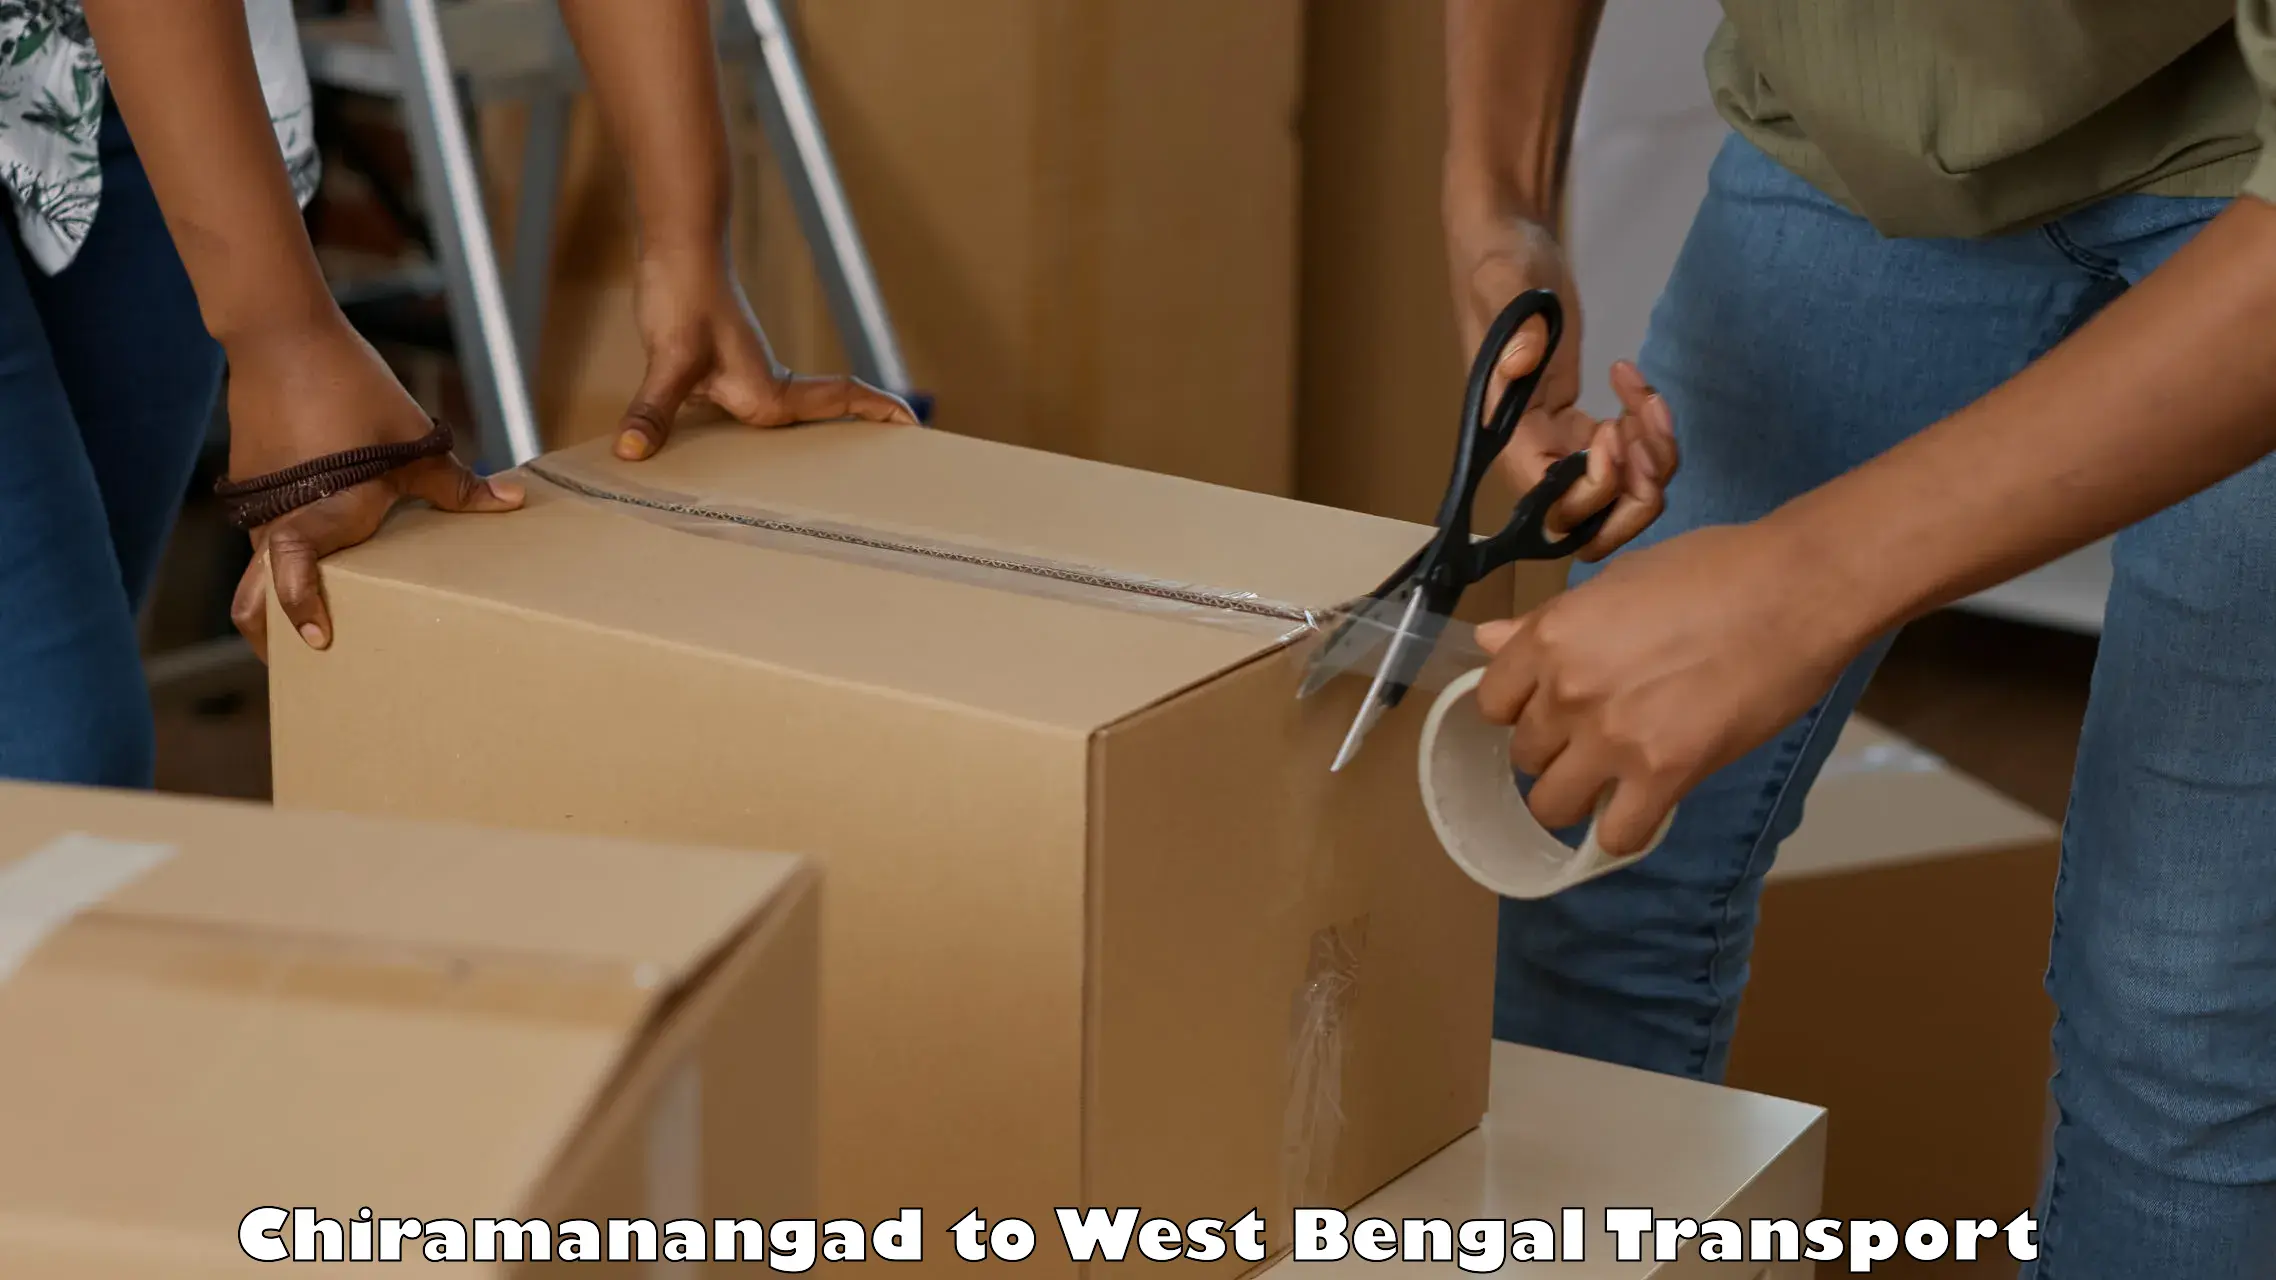 Goods transport services Chiramanangad to West Bengal